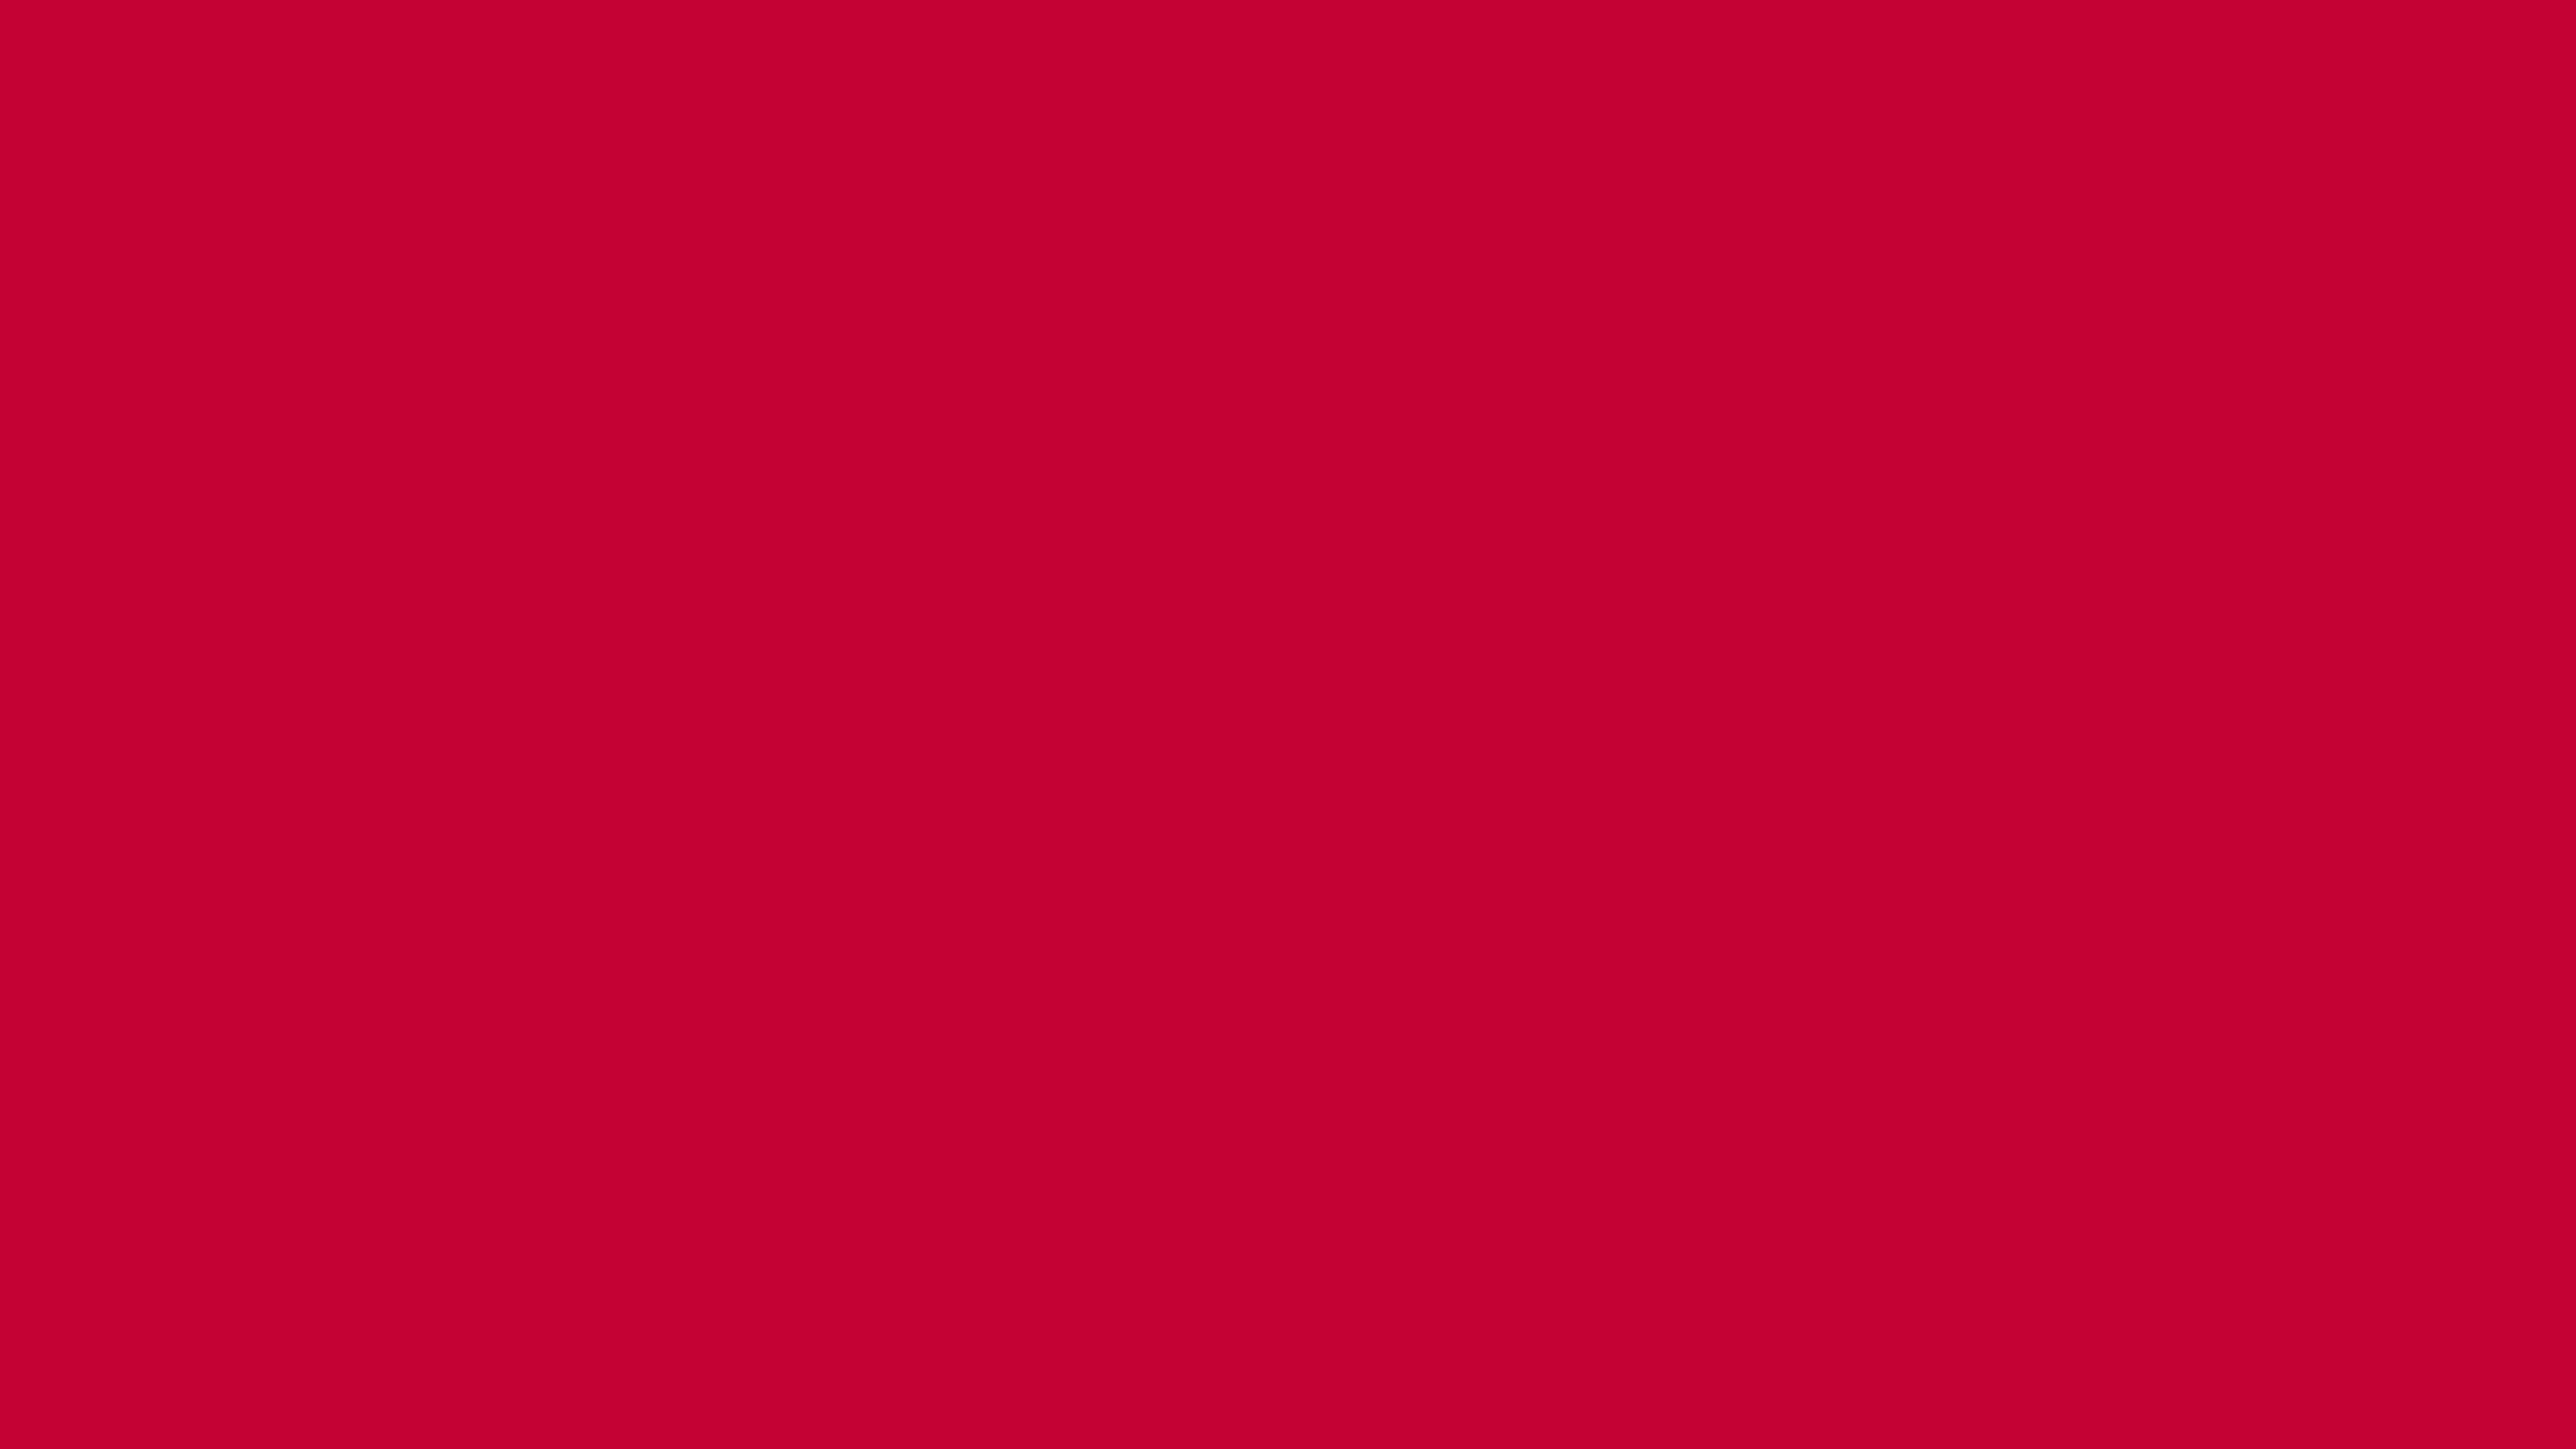 4096x2304 Red NCS Solid Color Background